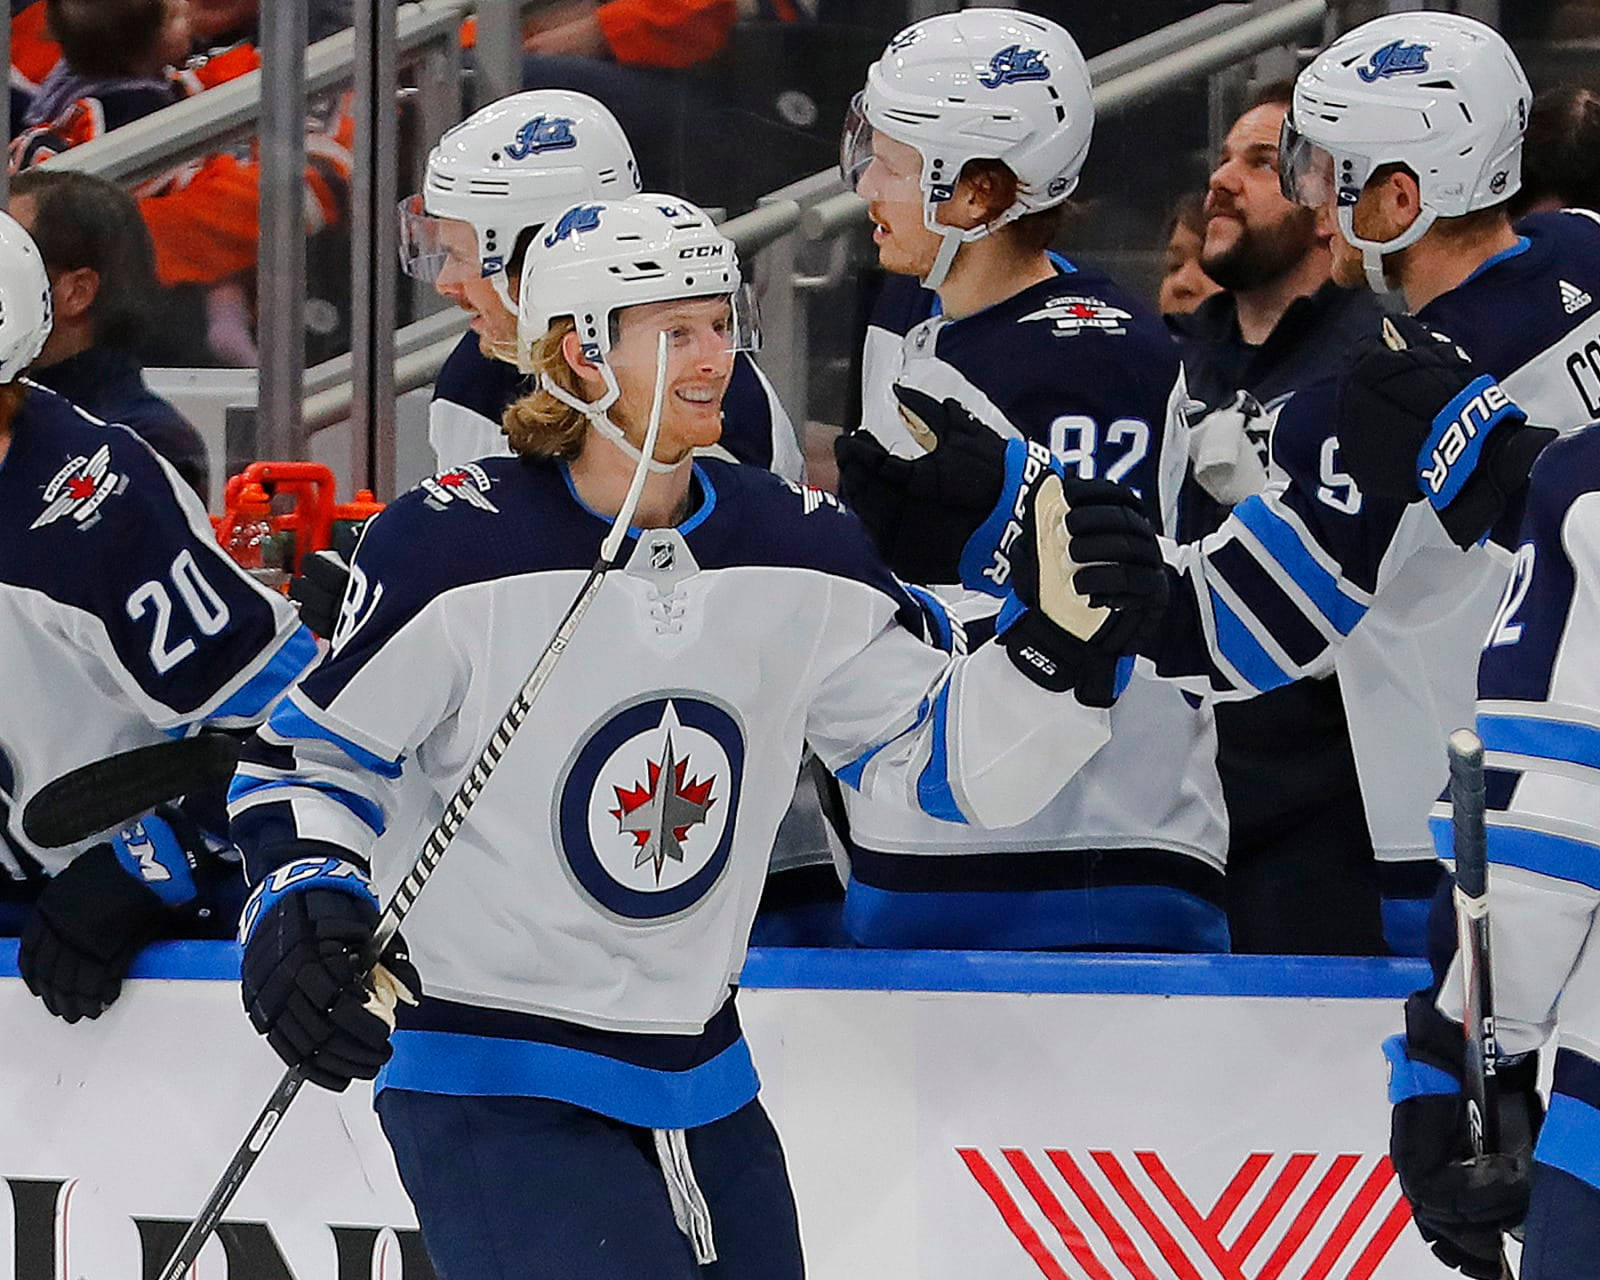 Ice Hockey Star Kyle Connor in action with Winnipeg Jets teammates Wallpaper